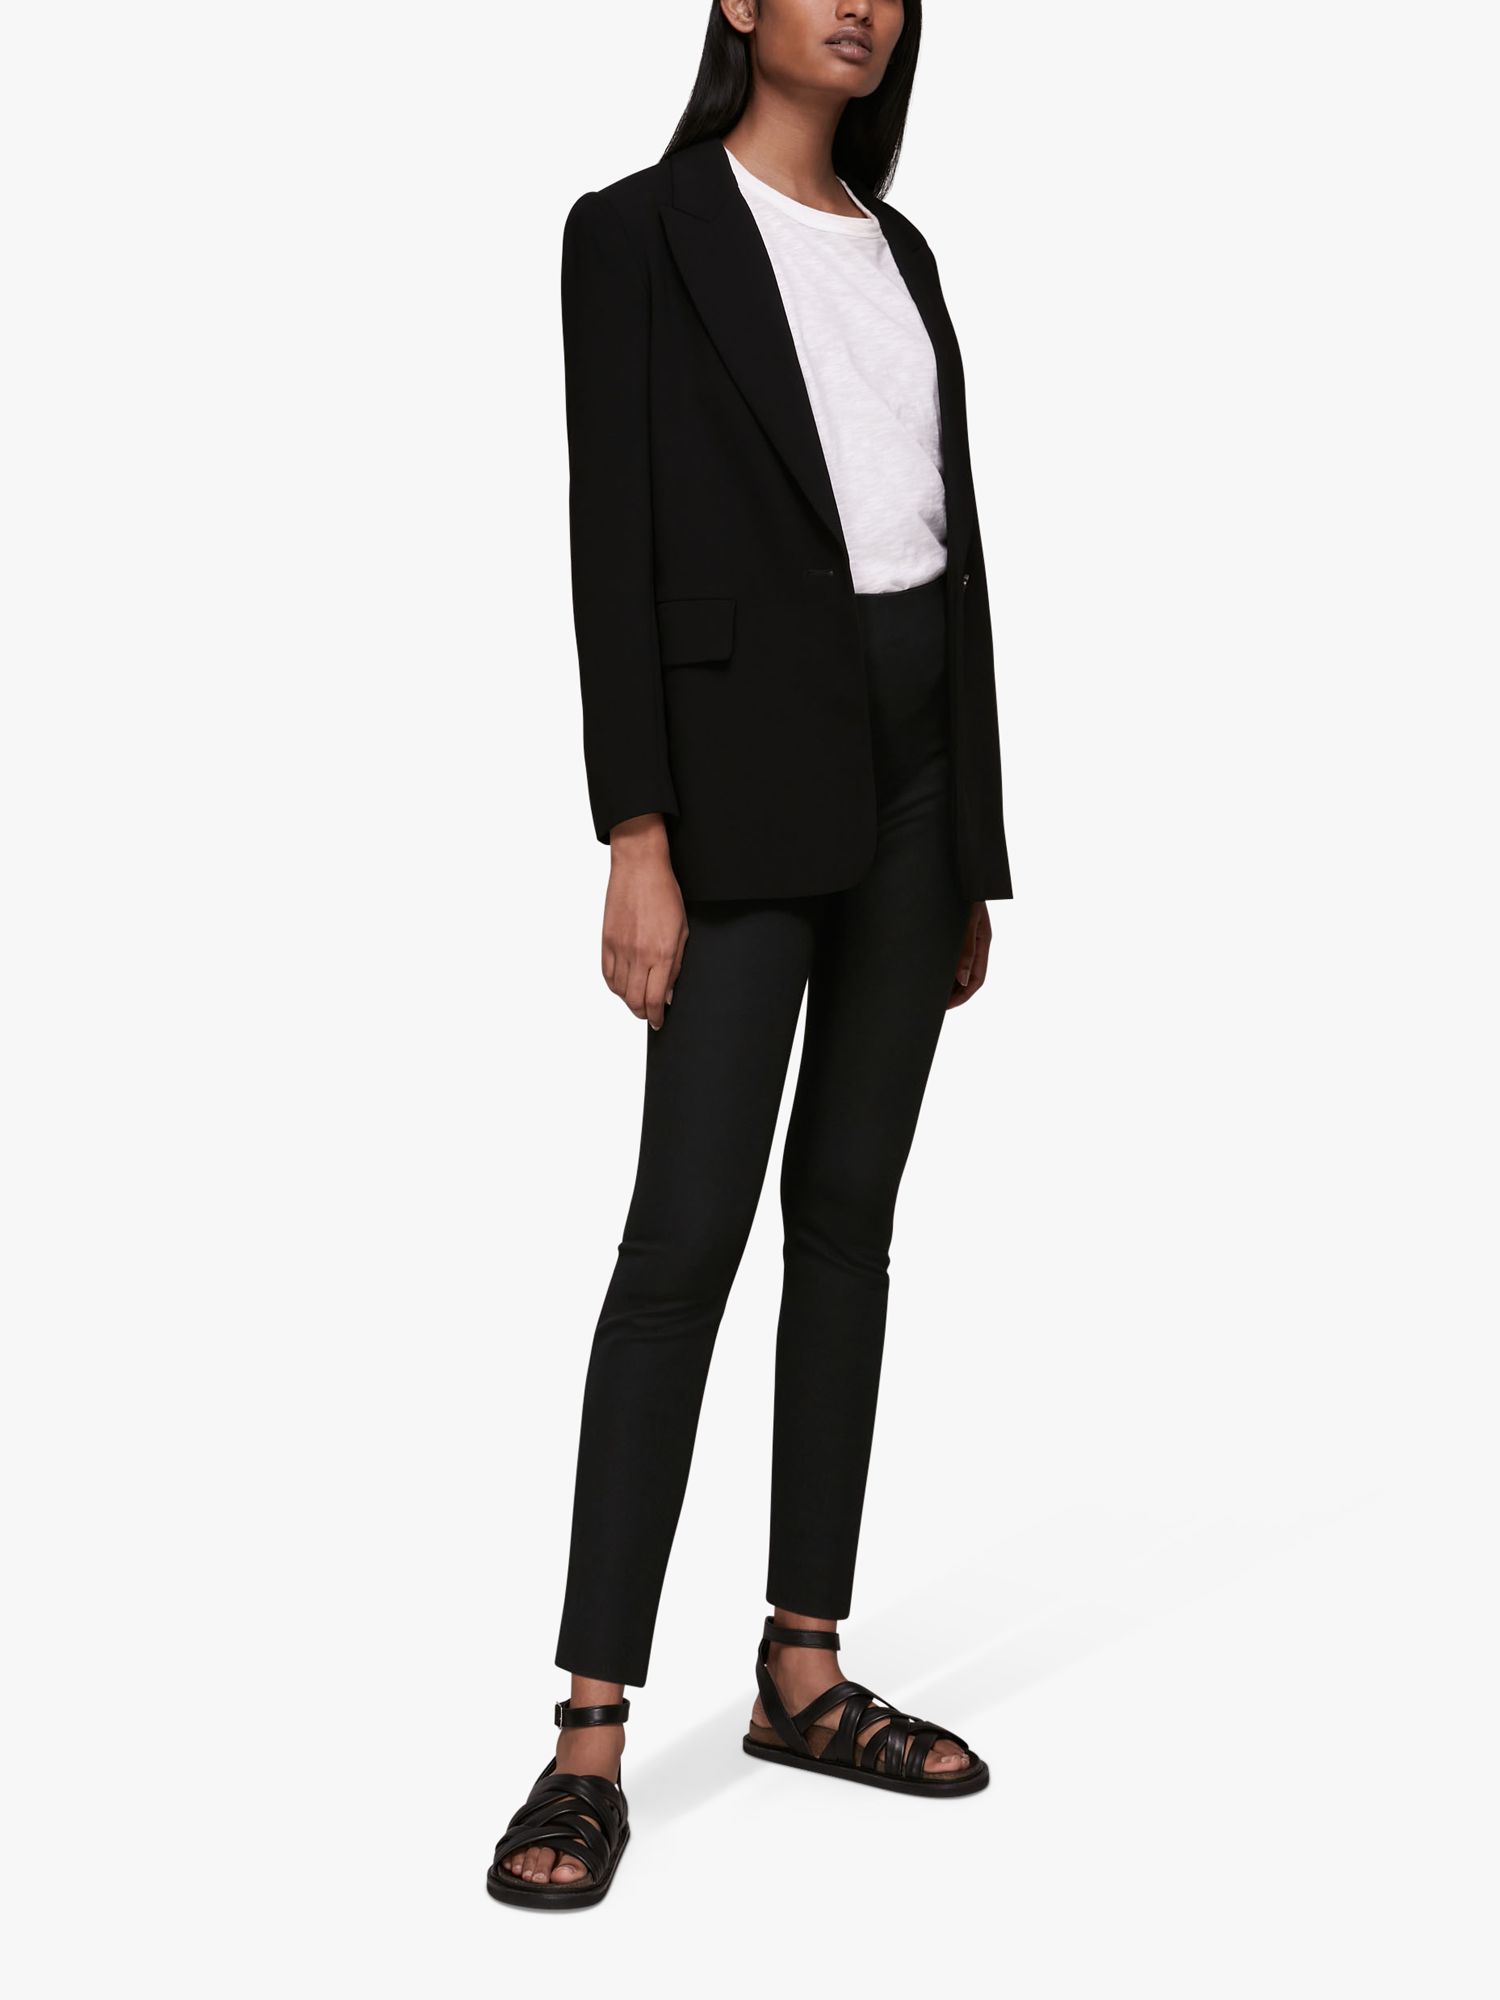 Whistles Petite Super Stretch Trousers, Black at John Lewis & Partners